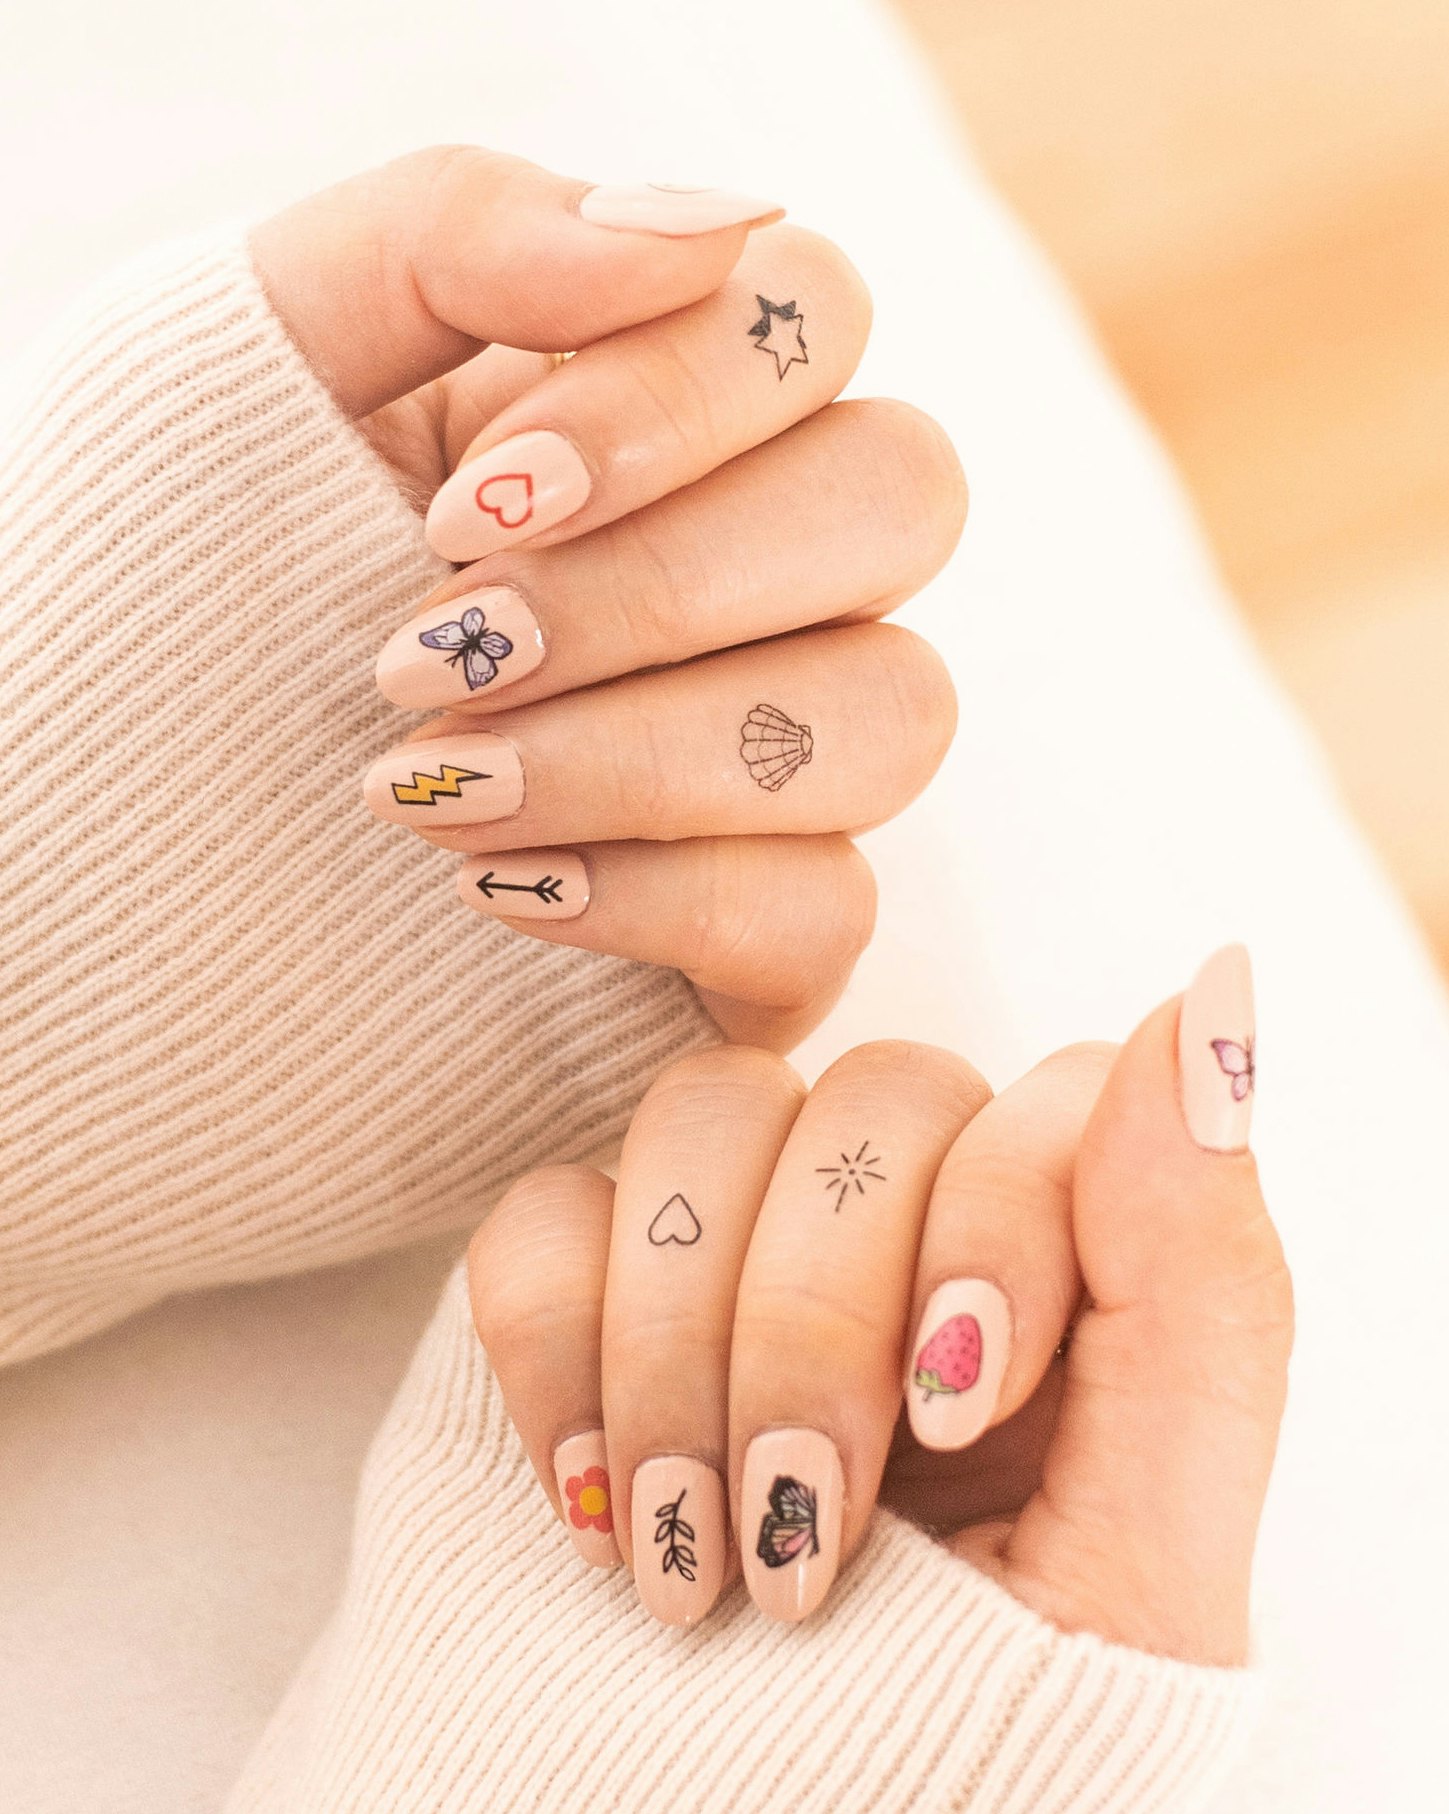 Nail Tattoos Are Trending and Not Nearly as Permanent as They Look  Allure